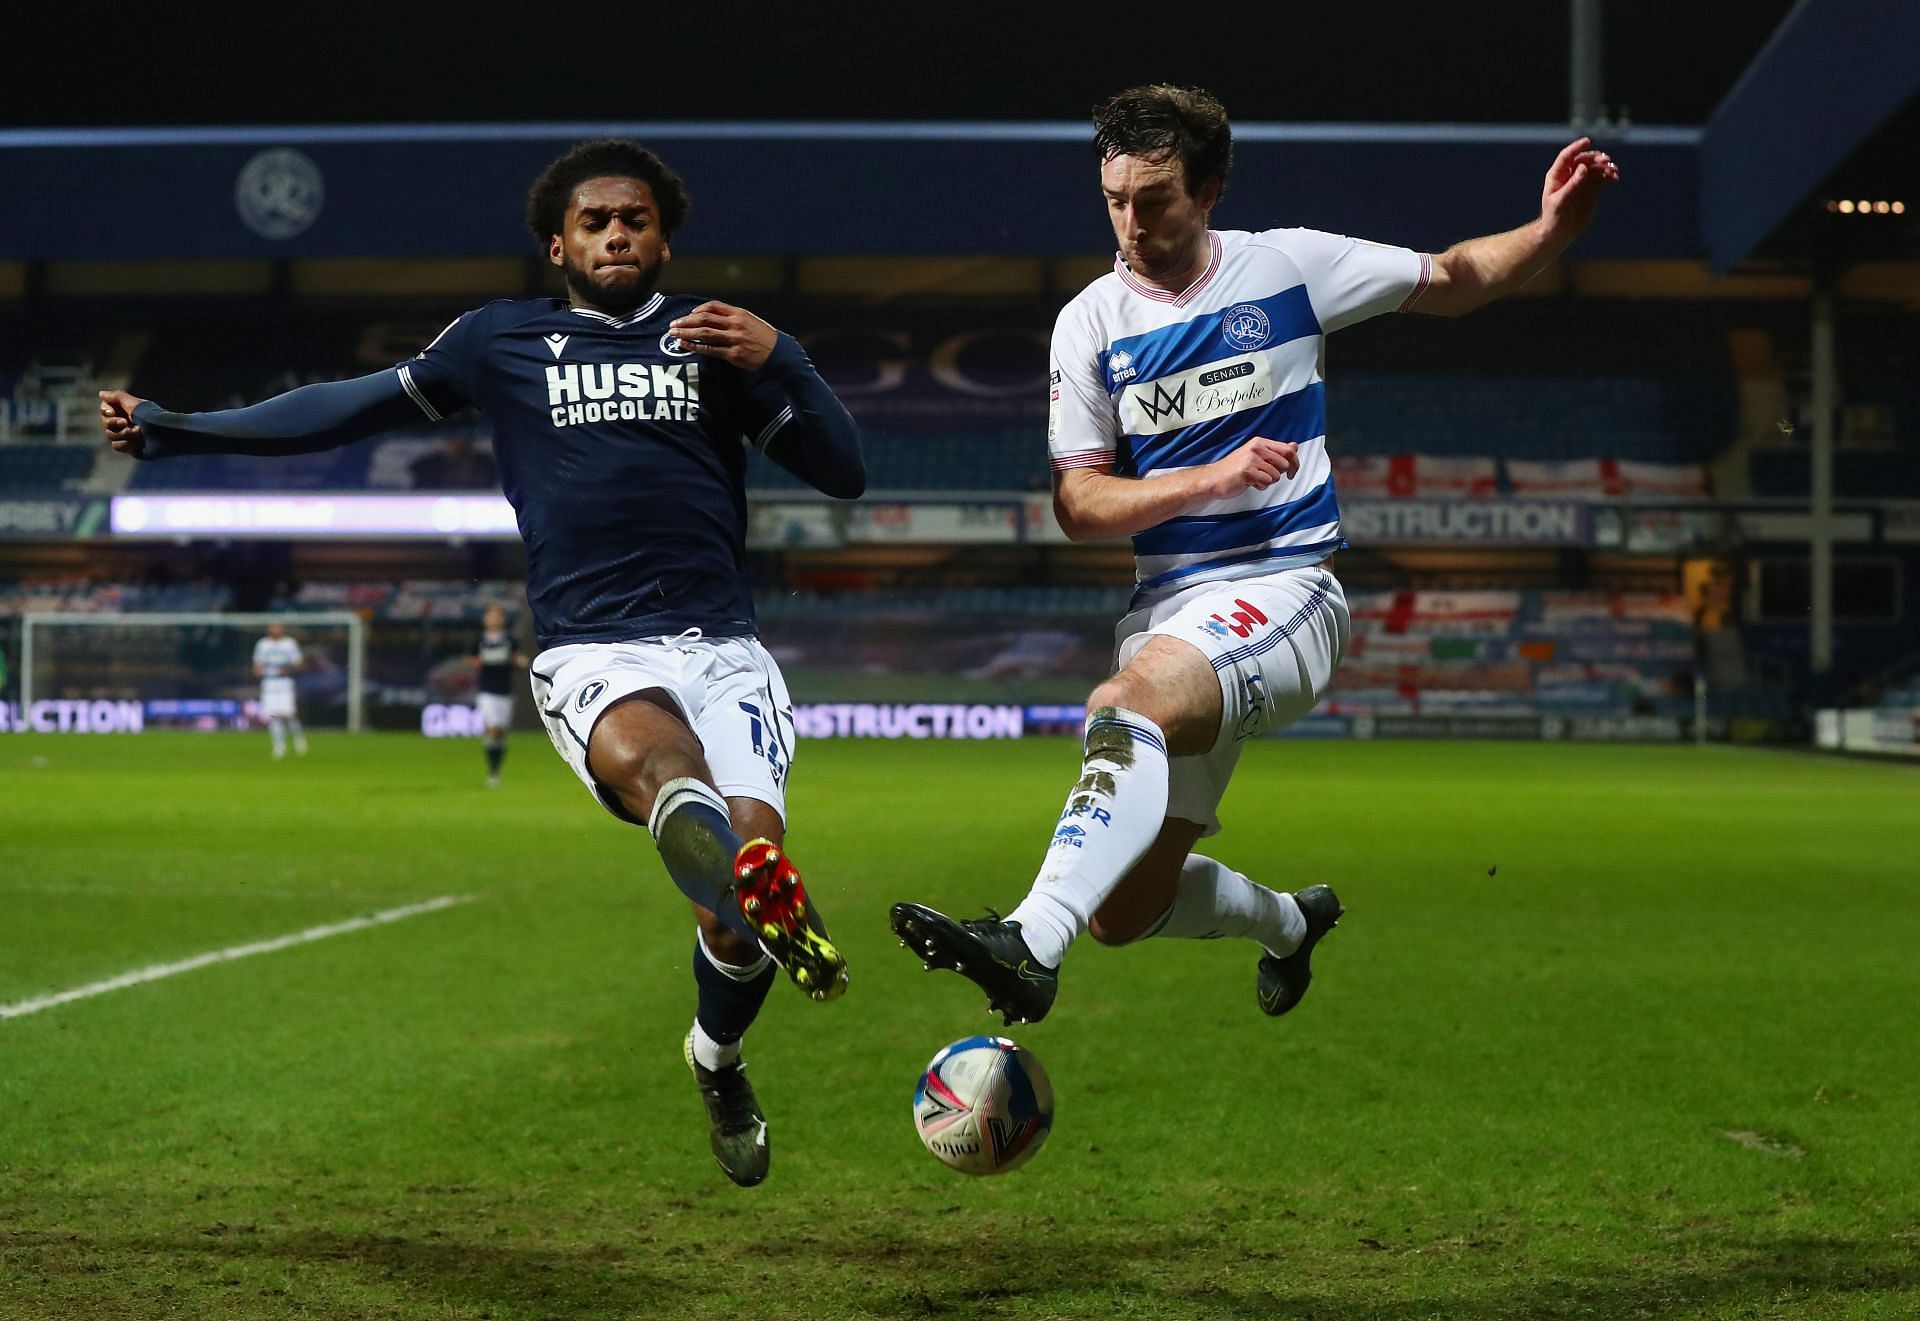 Queens Park Rangers face Millwall on Tuesday